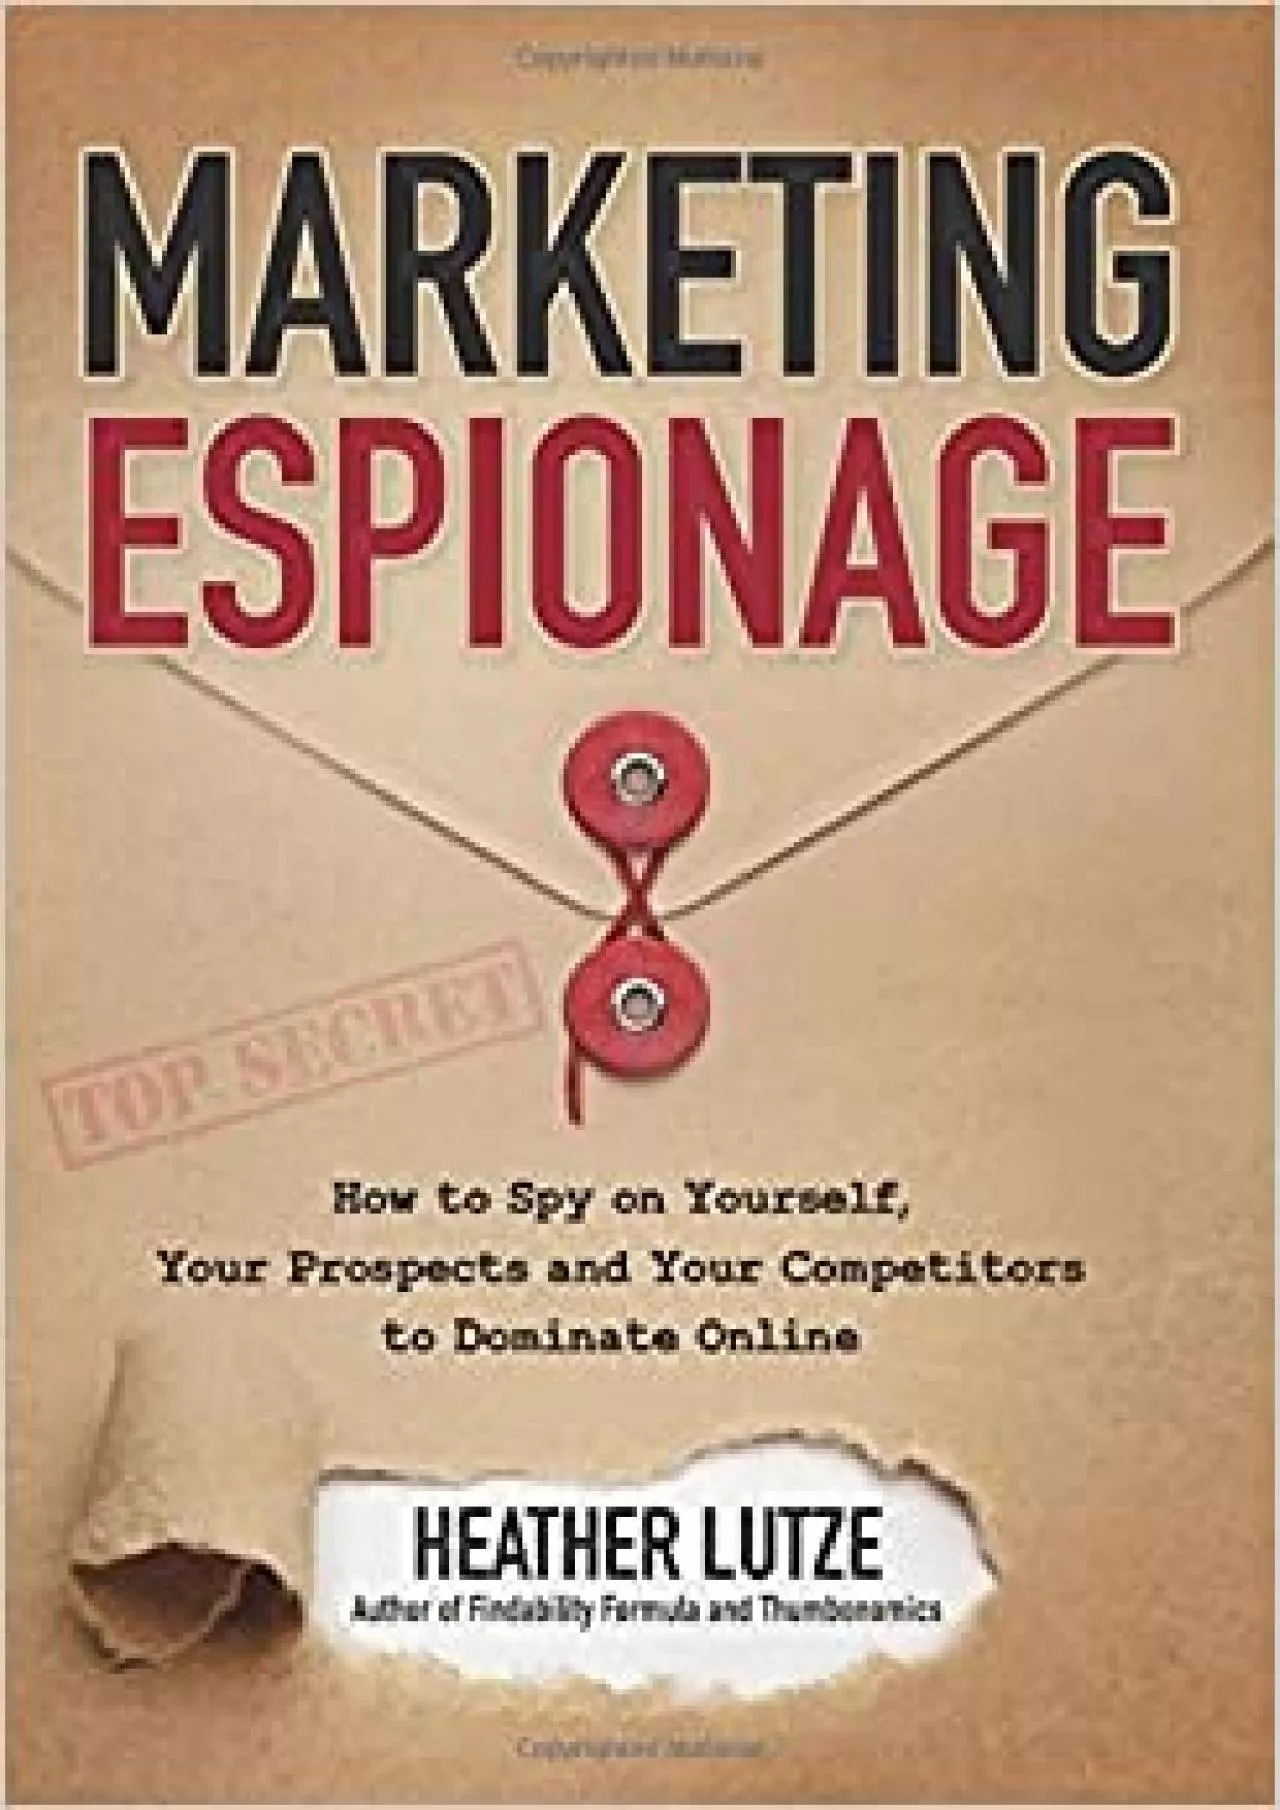 Marketing Espionage How to Spy on Yourself, Your Prospects and Your Competitors to Dominate